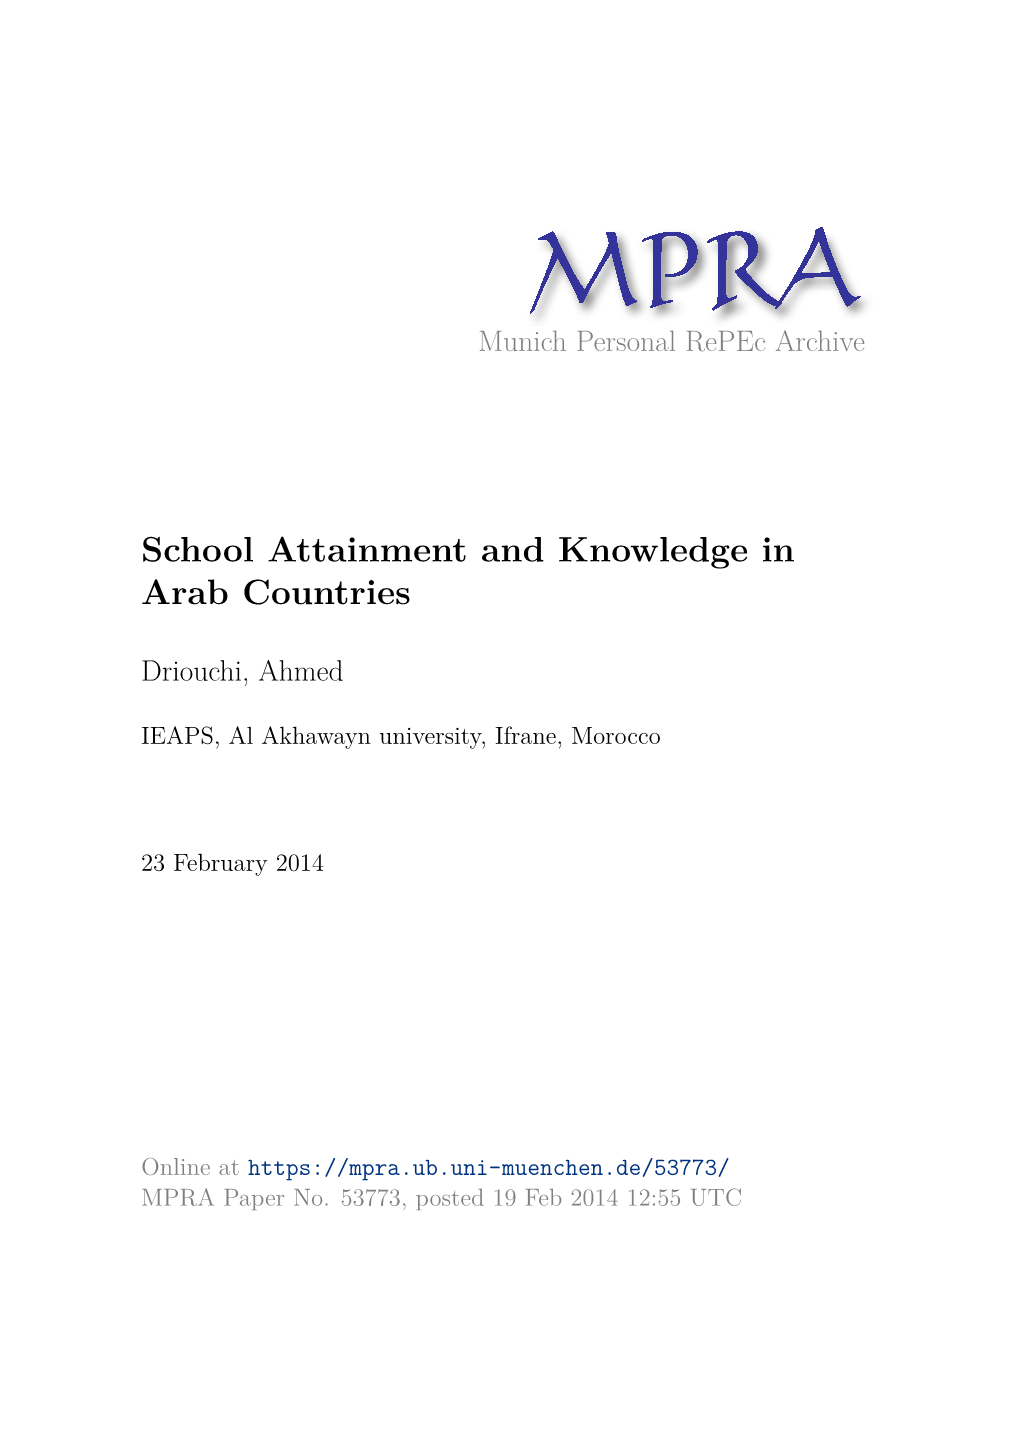 School Attainment and Knowledge in Arab Countries